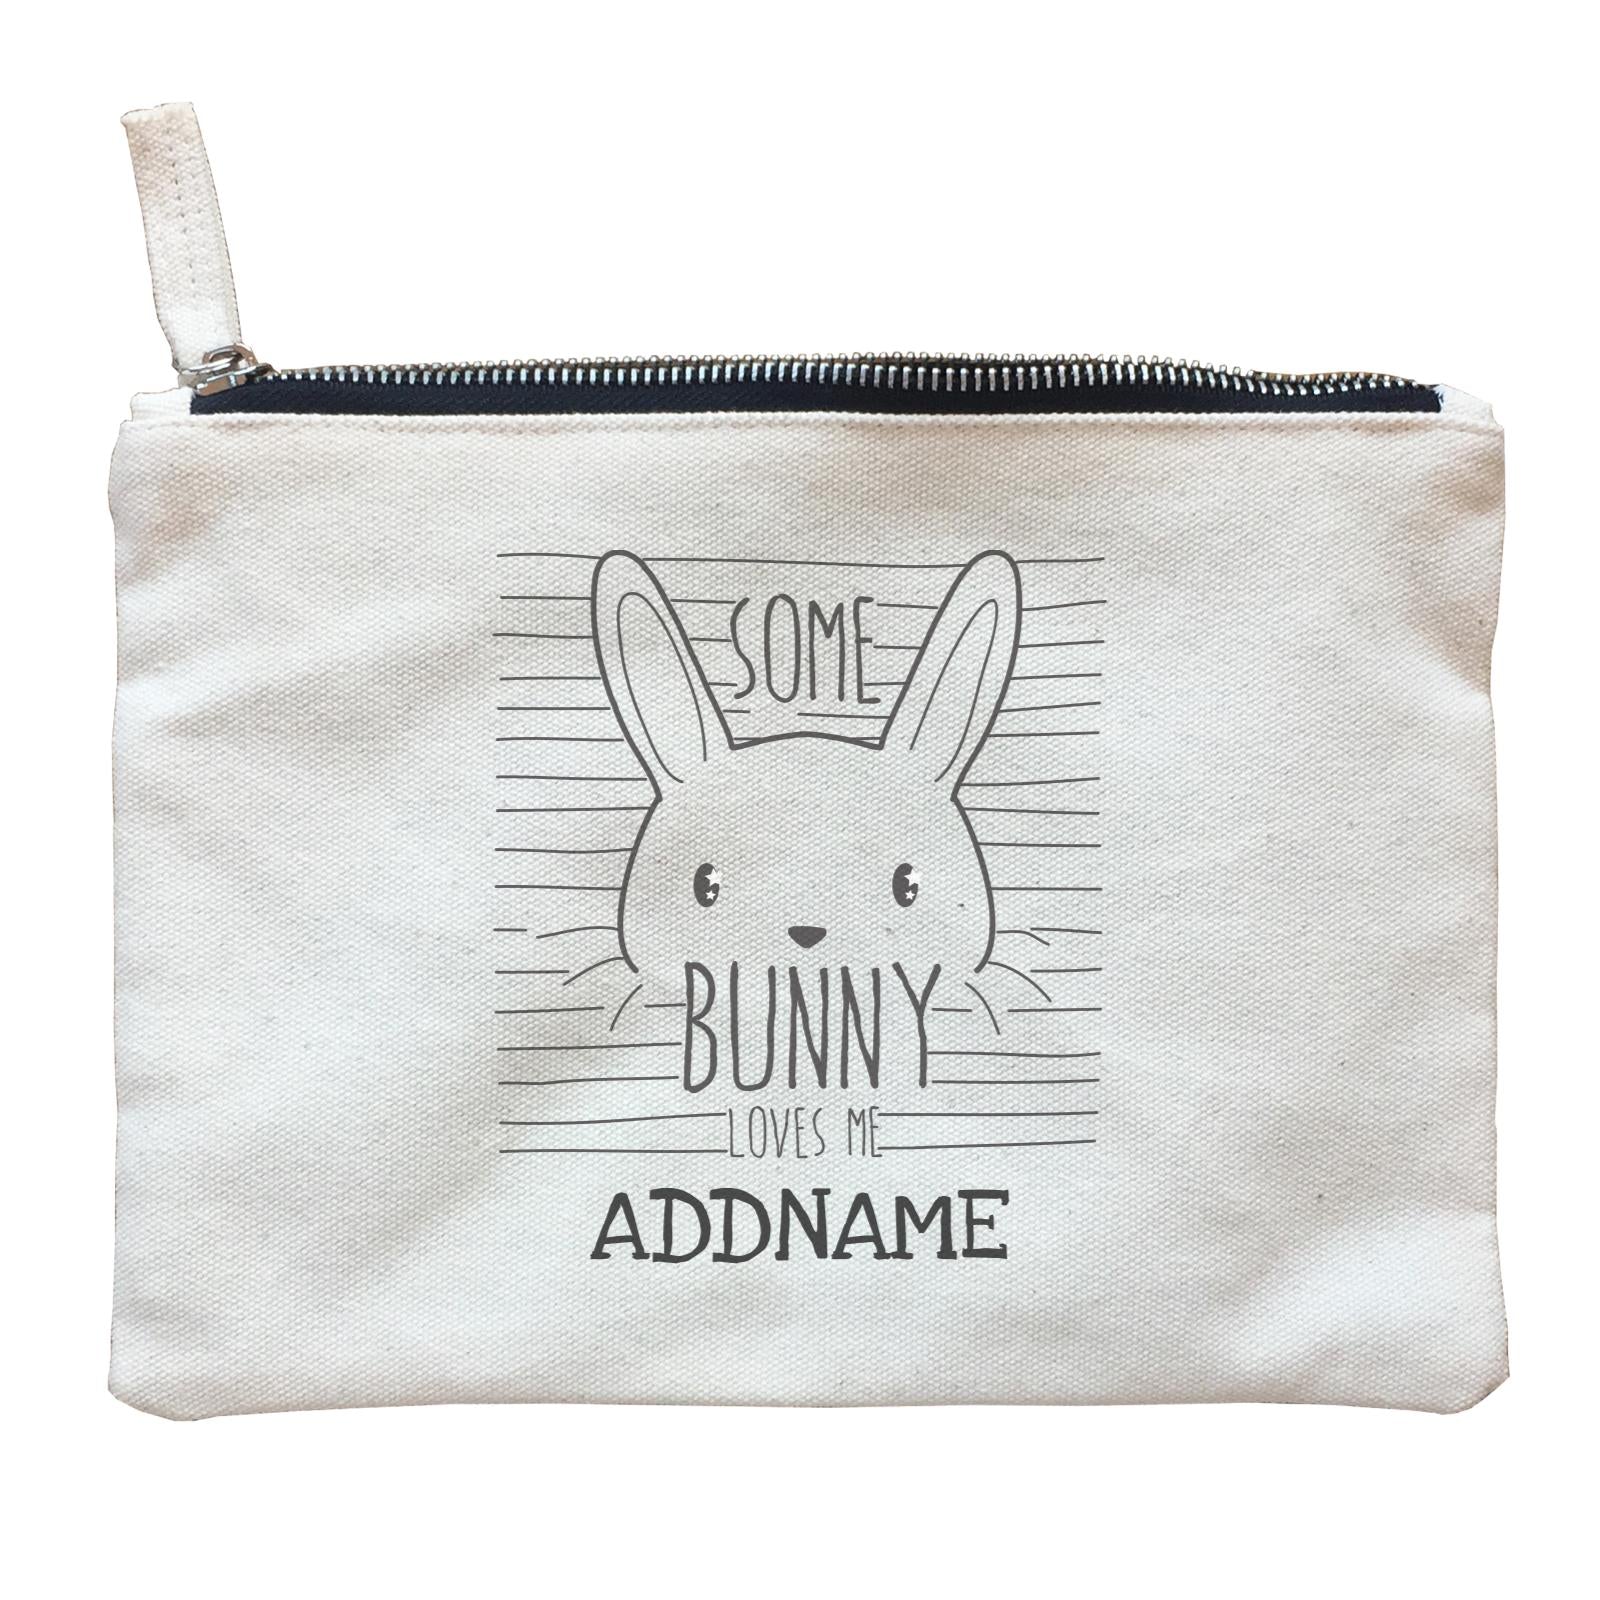 Some Bunny Loves Me Addname Zipper Pouch